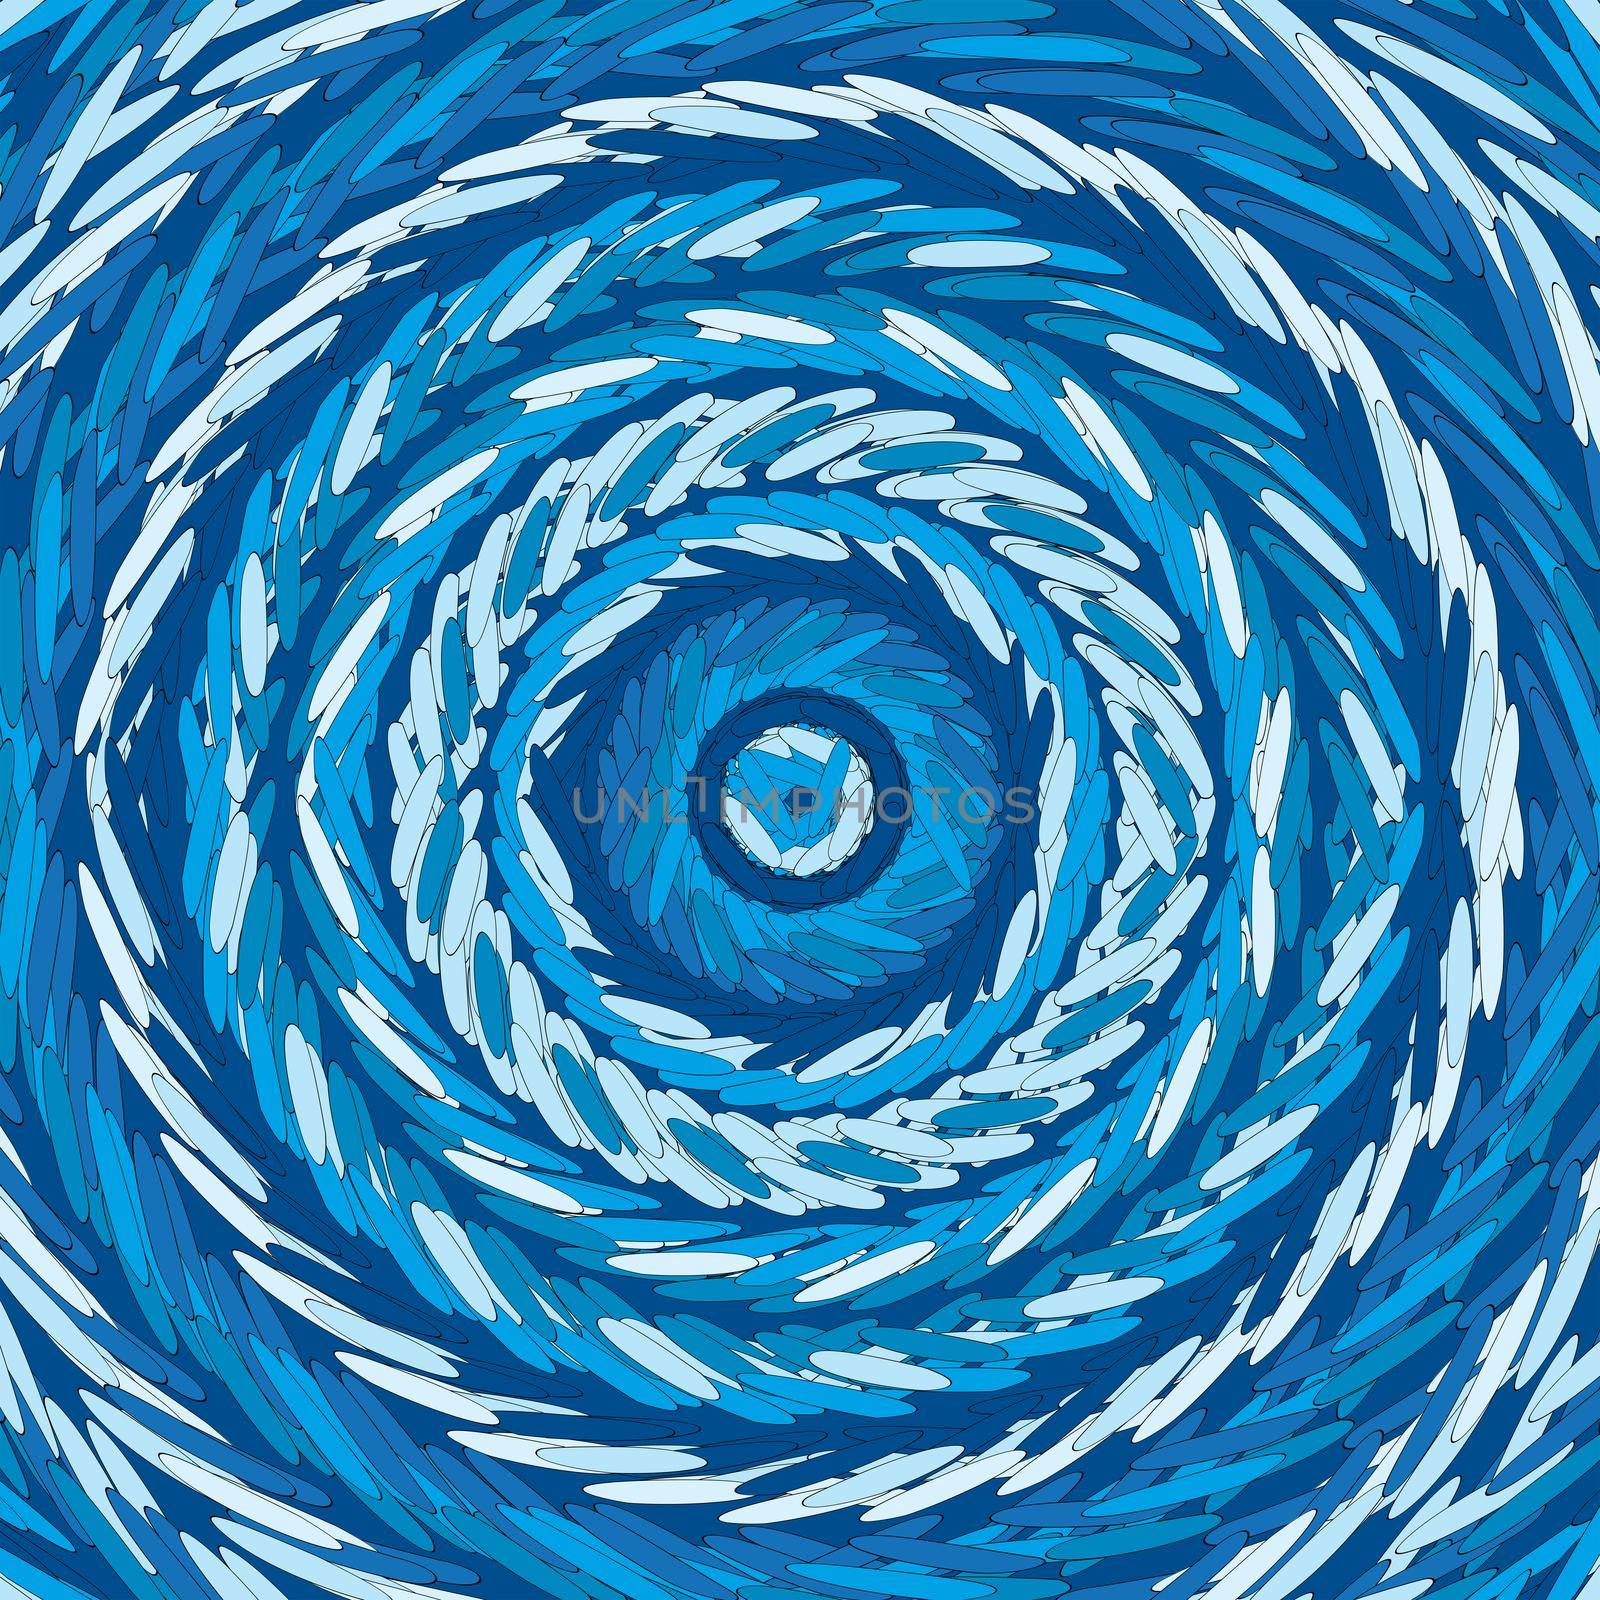 Circular design with blue stick lines by hibrida13